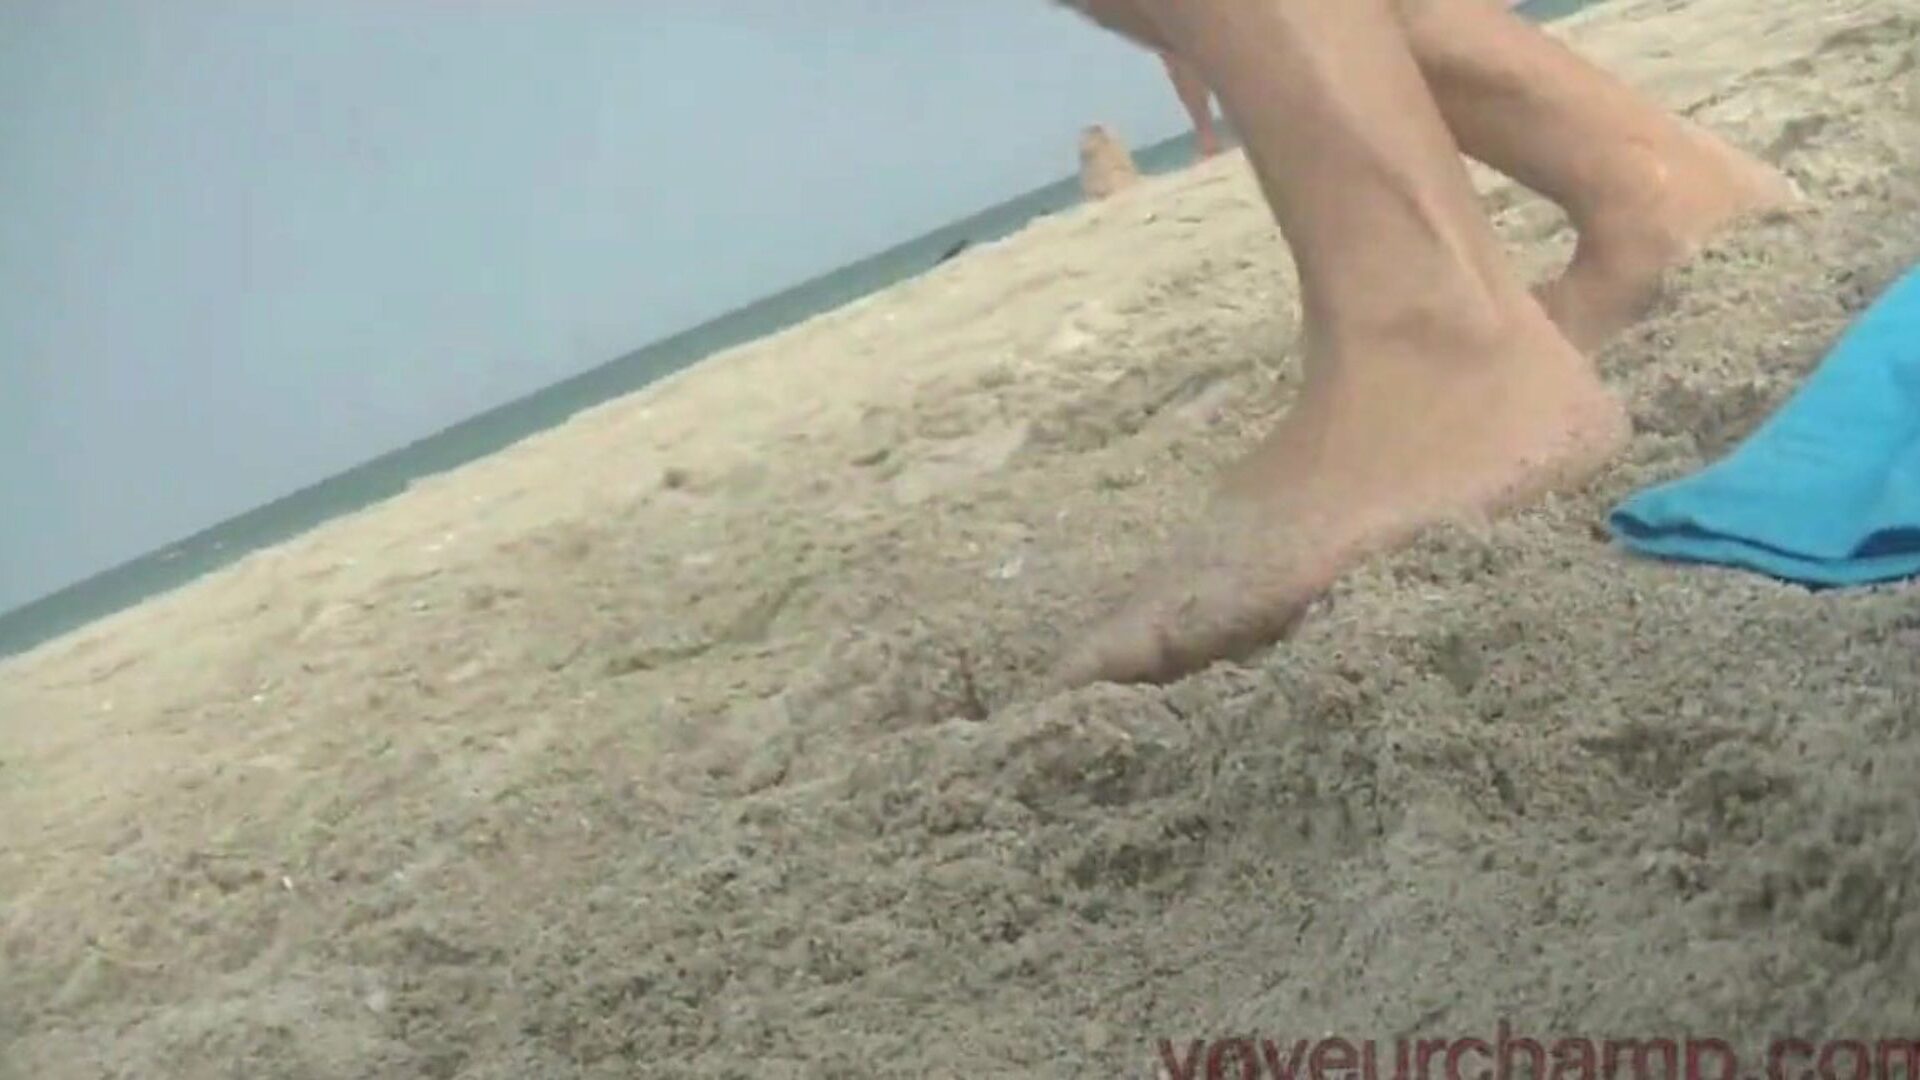 Exhibitionist Wife Nude Beach And Public Teasing! Go to our site and see all our uncircumcised clips